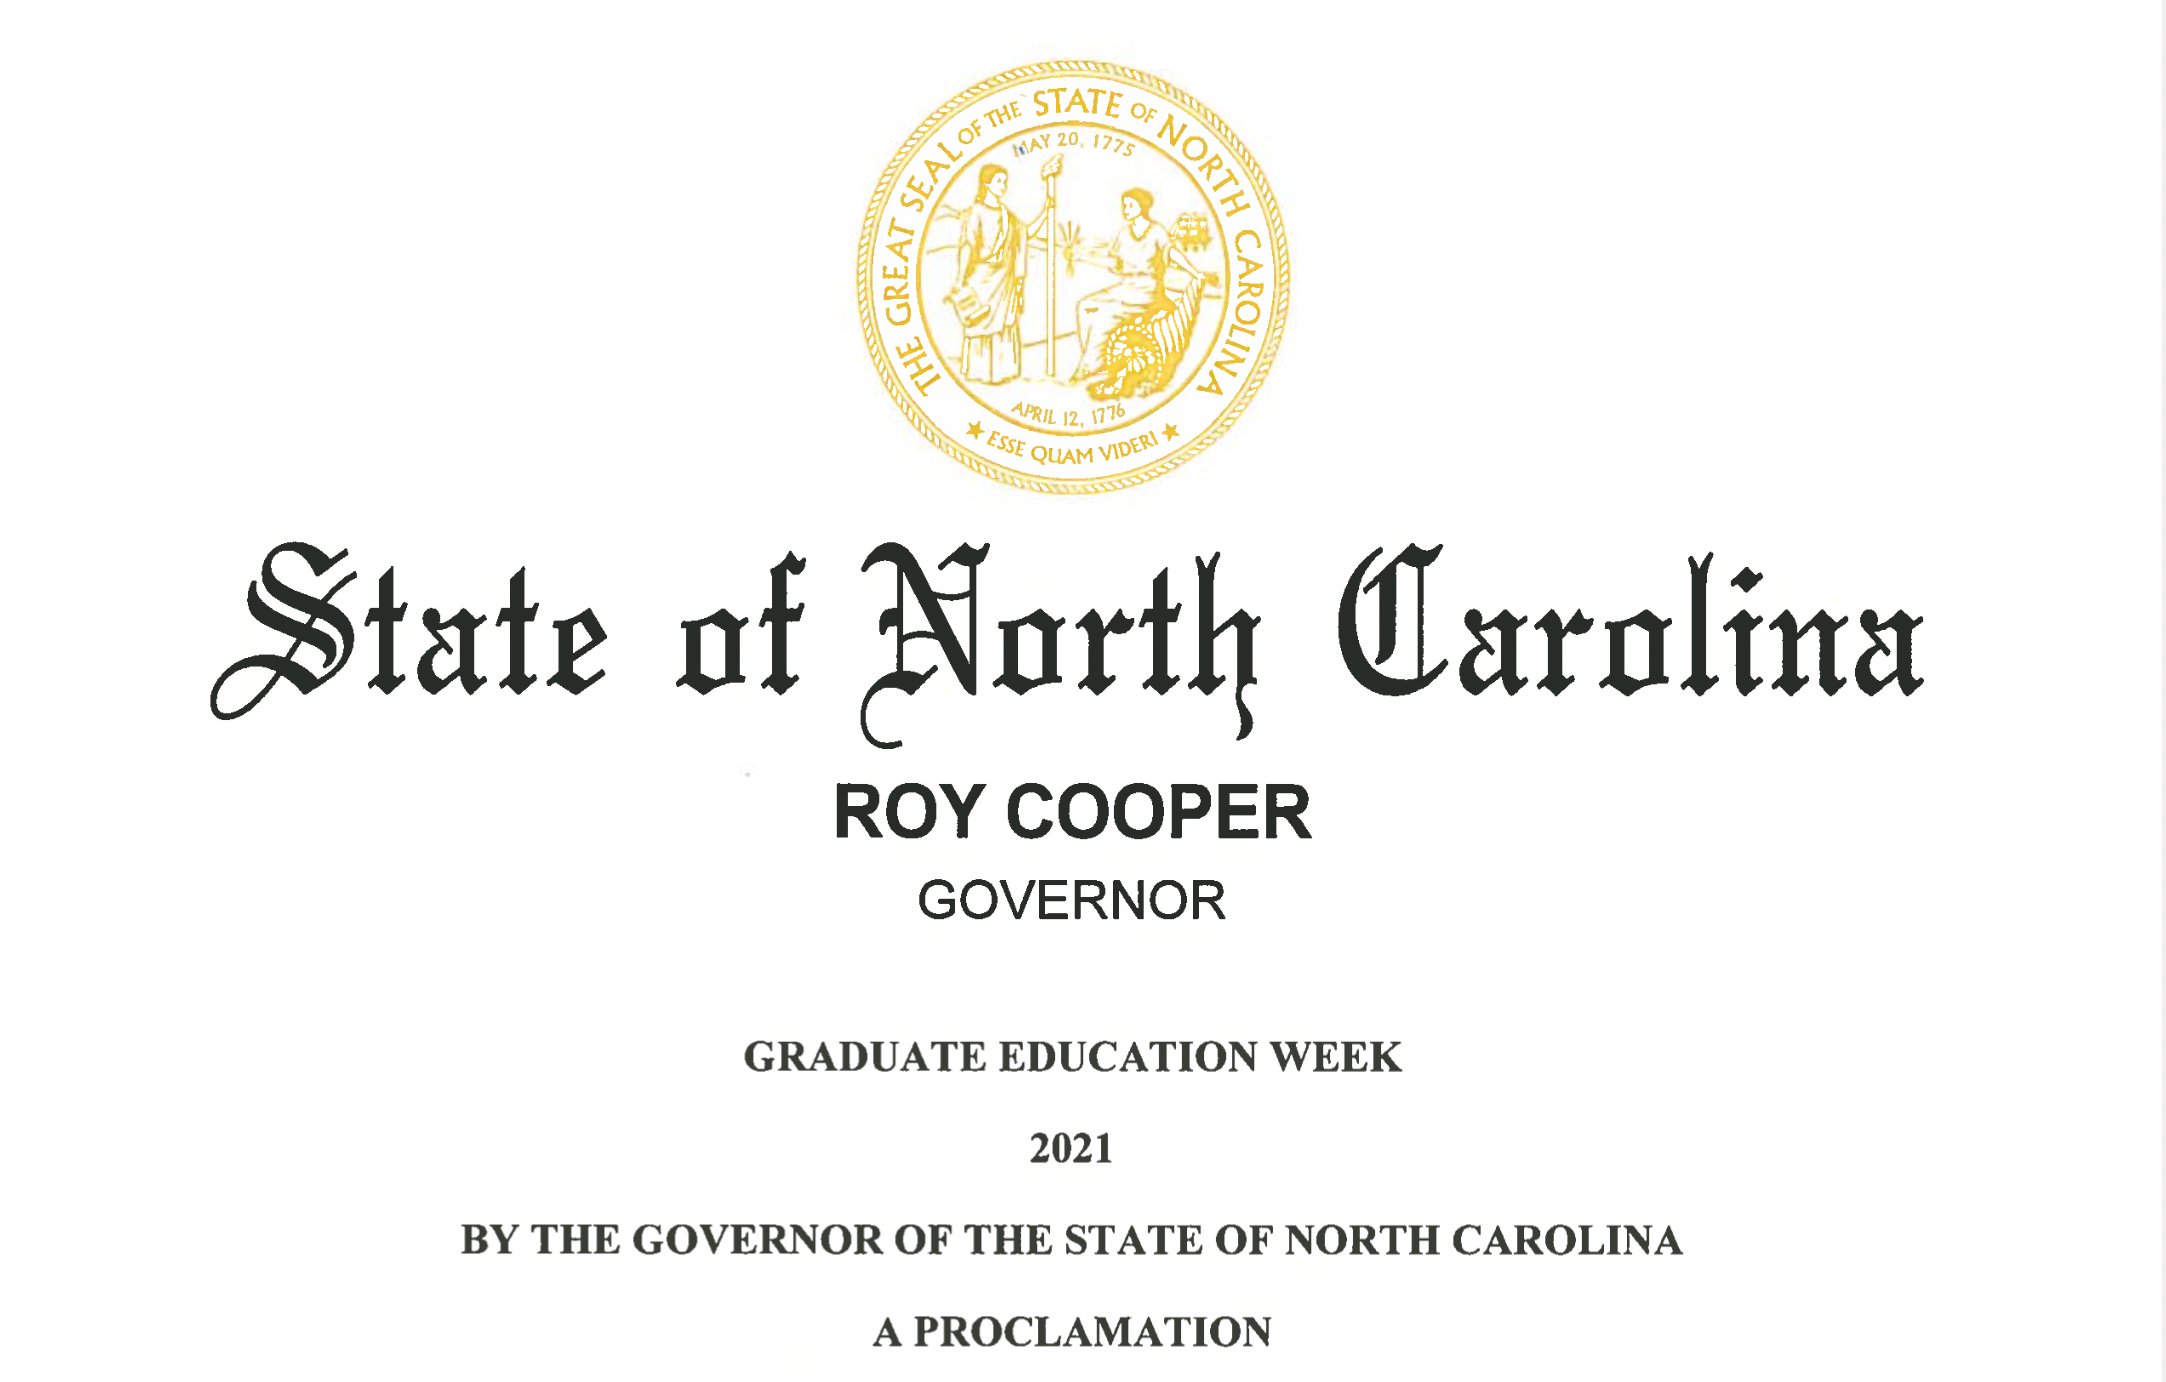 It's Graduate Education Week! The @NC_Governor has issued a proclamation to help us celebrate graduate students' contributions